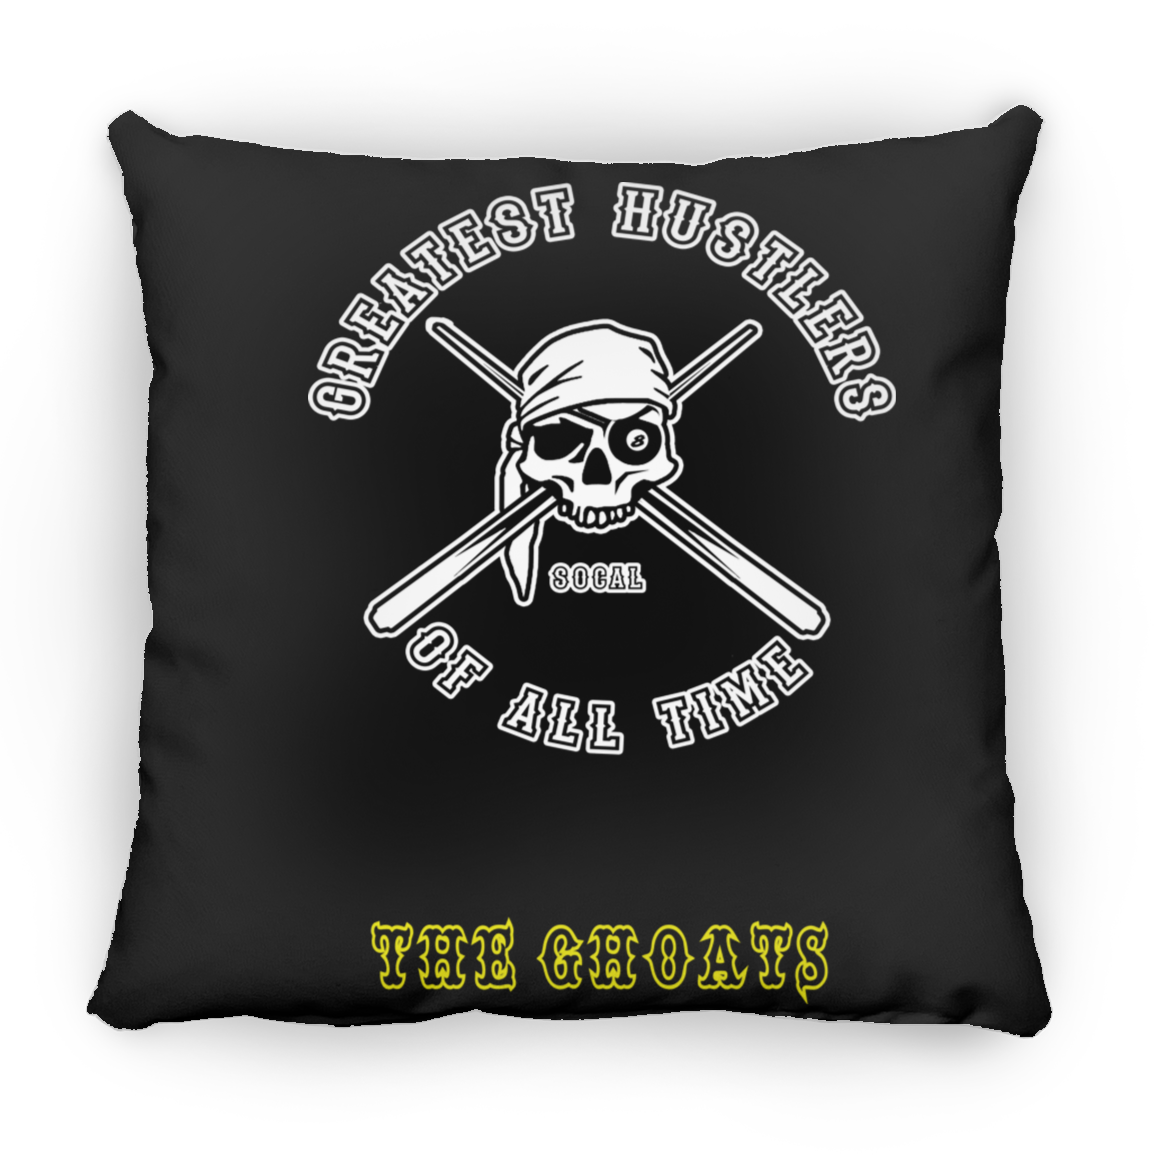 The GHOATS Custom Design. #4 Motorcycle Club Style. Ver 1/2. Large Square Pillow